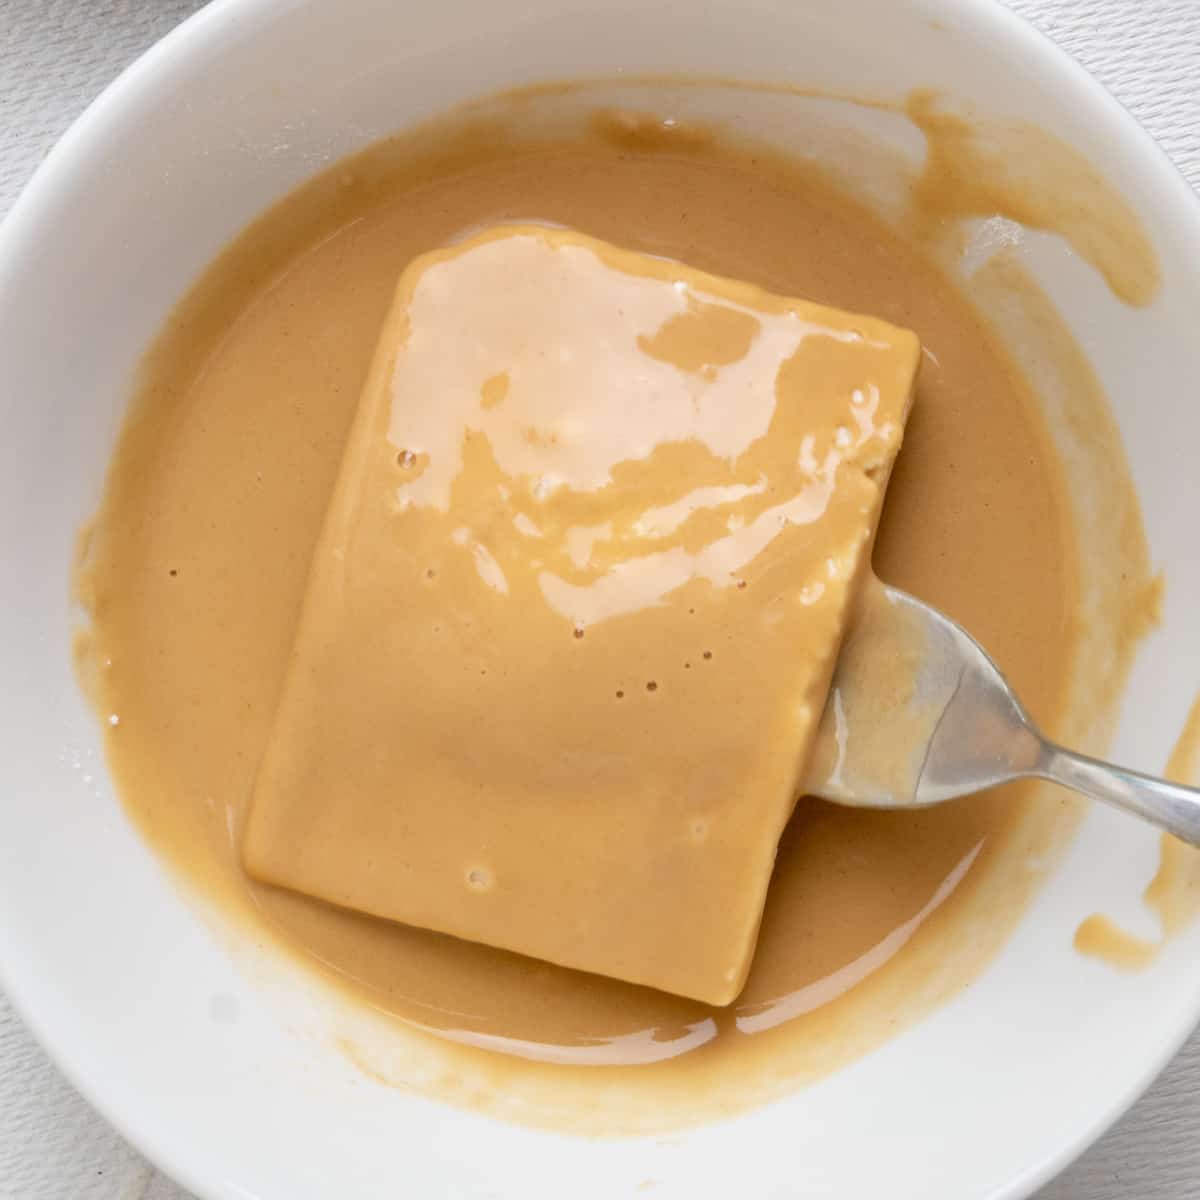 A slice of tofu covered in a light orange brown batter lifted from a bowl on fork.